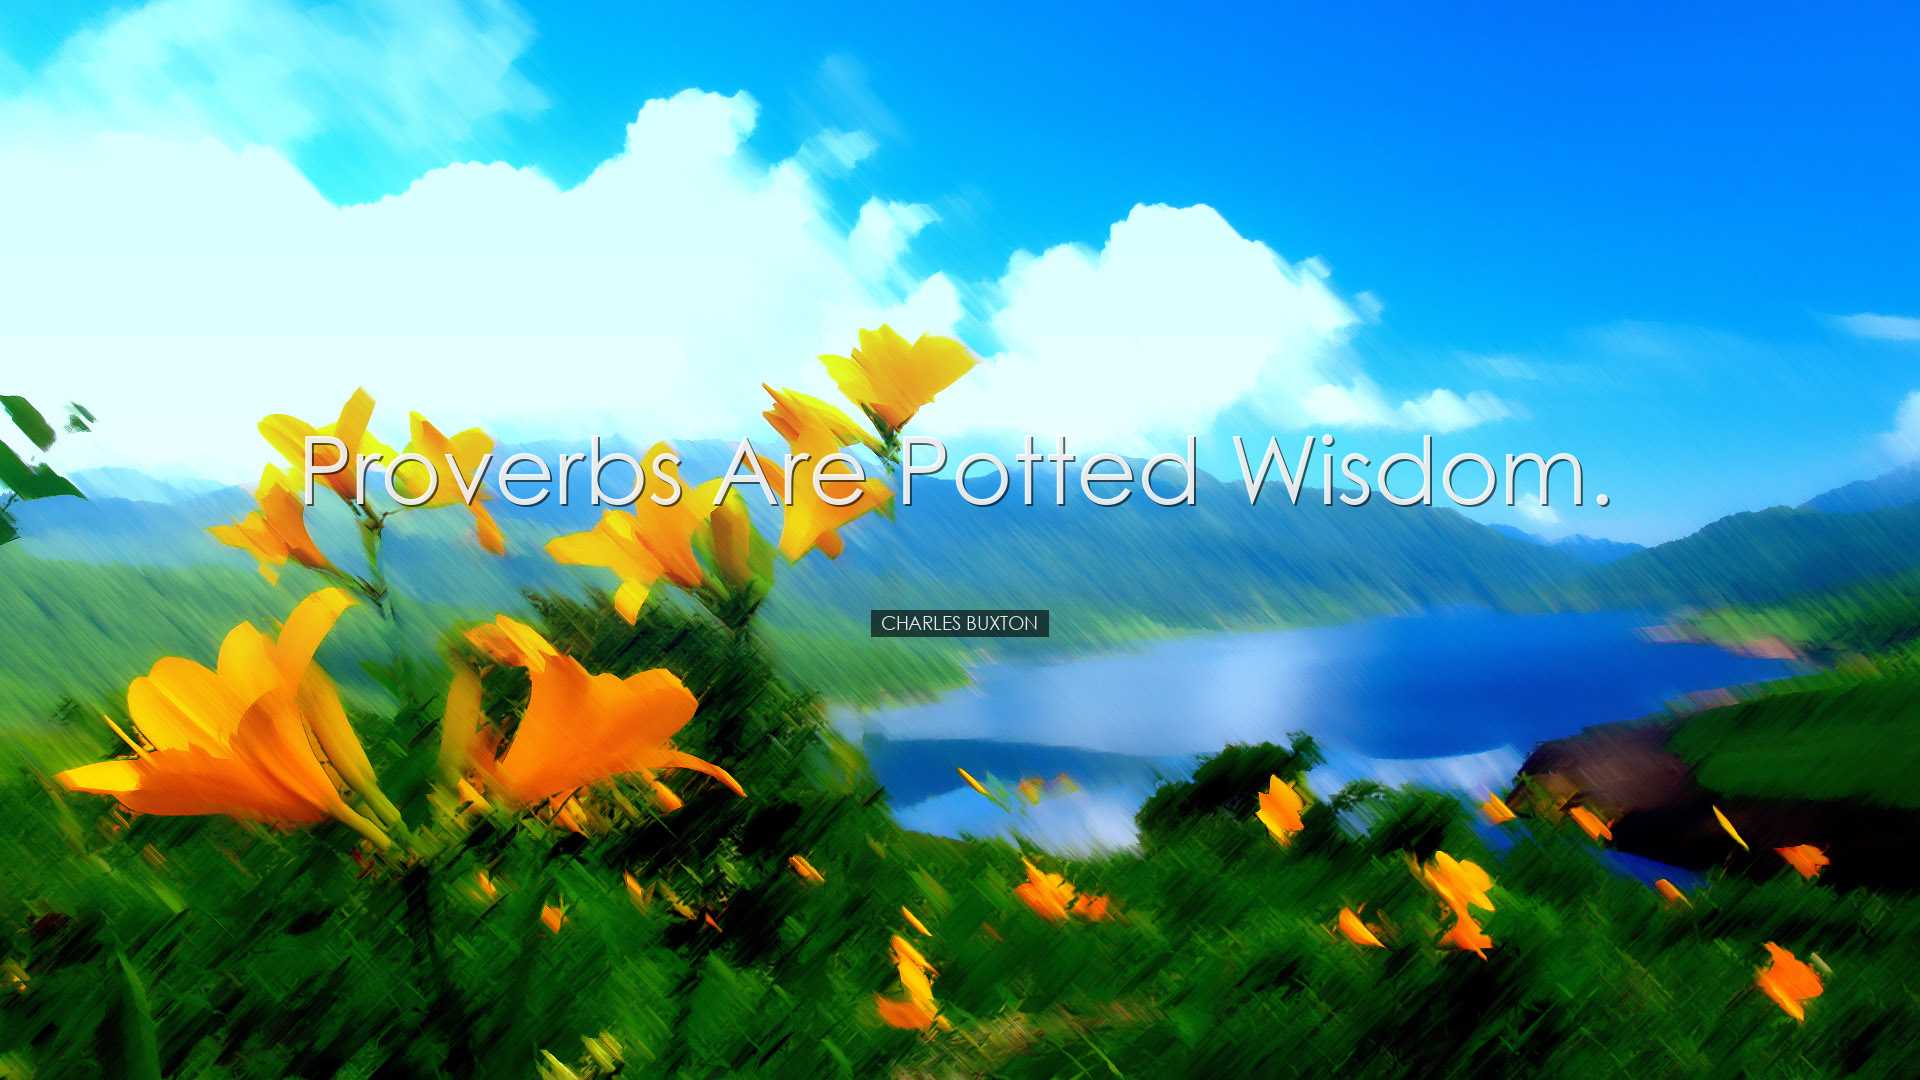 Proverbs are potted wisdom. - Charles Buxton